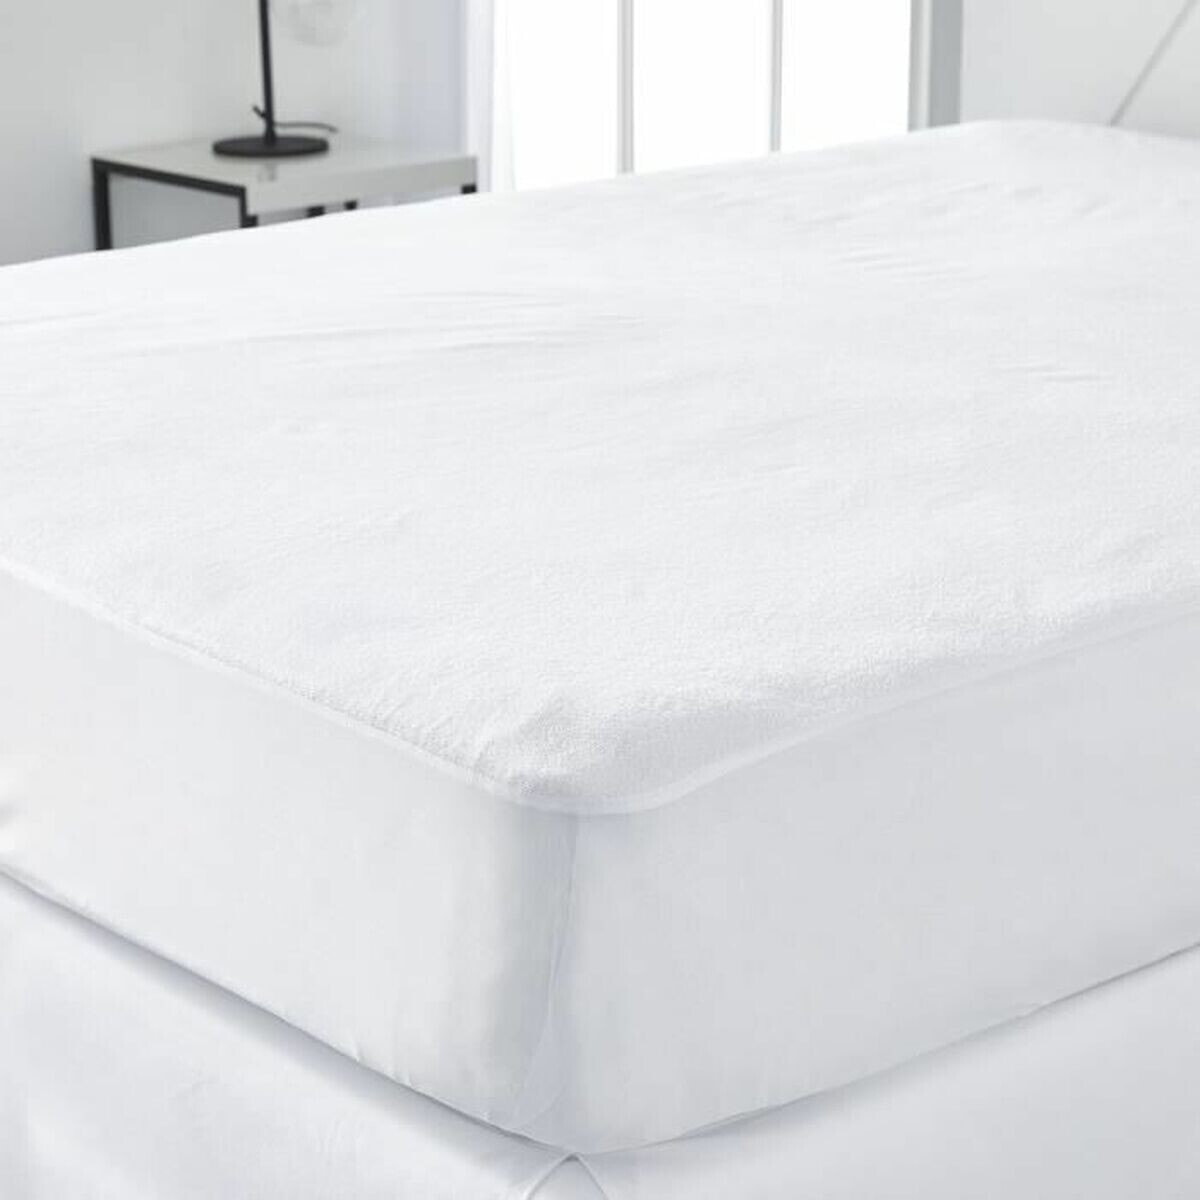 Mattress protector TODAY 10979-7730 140 x 190 cm